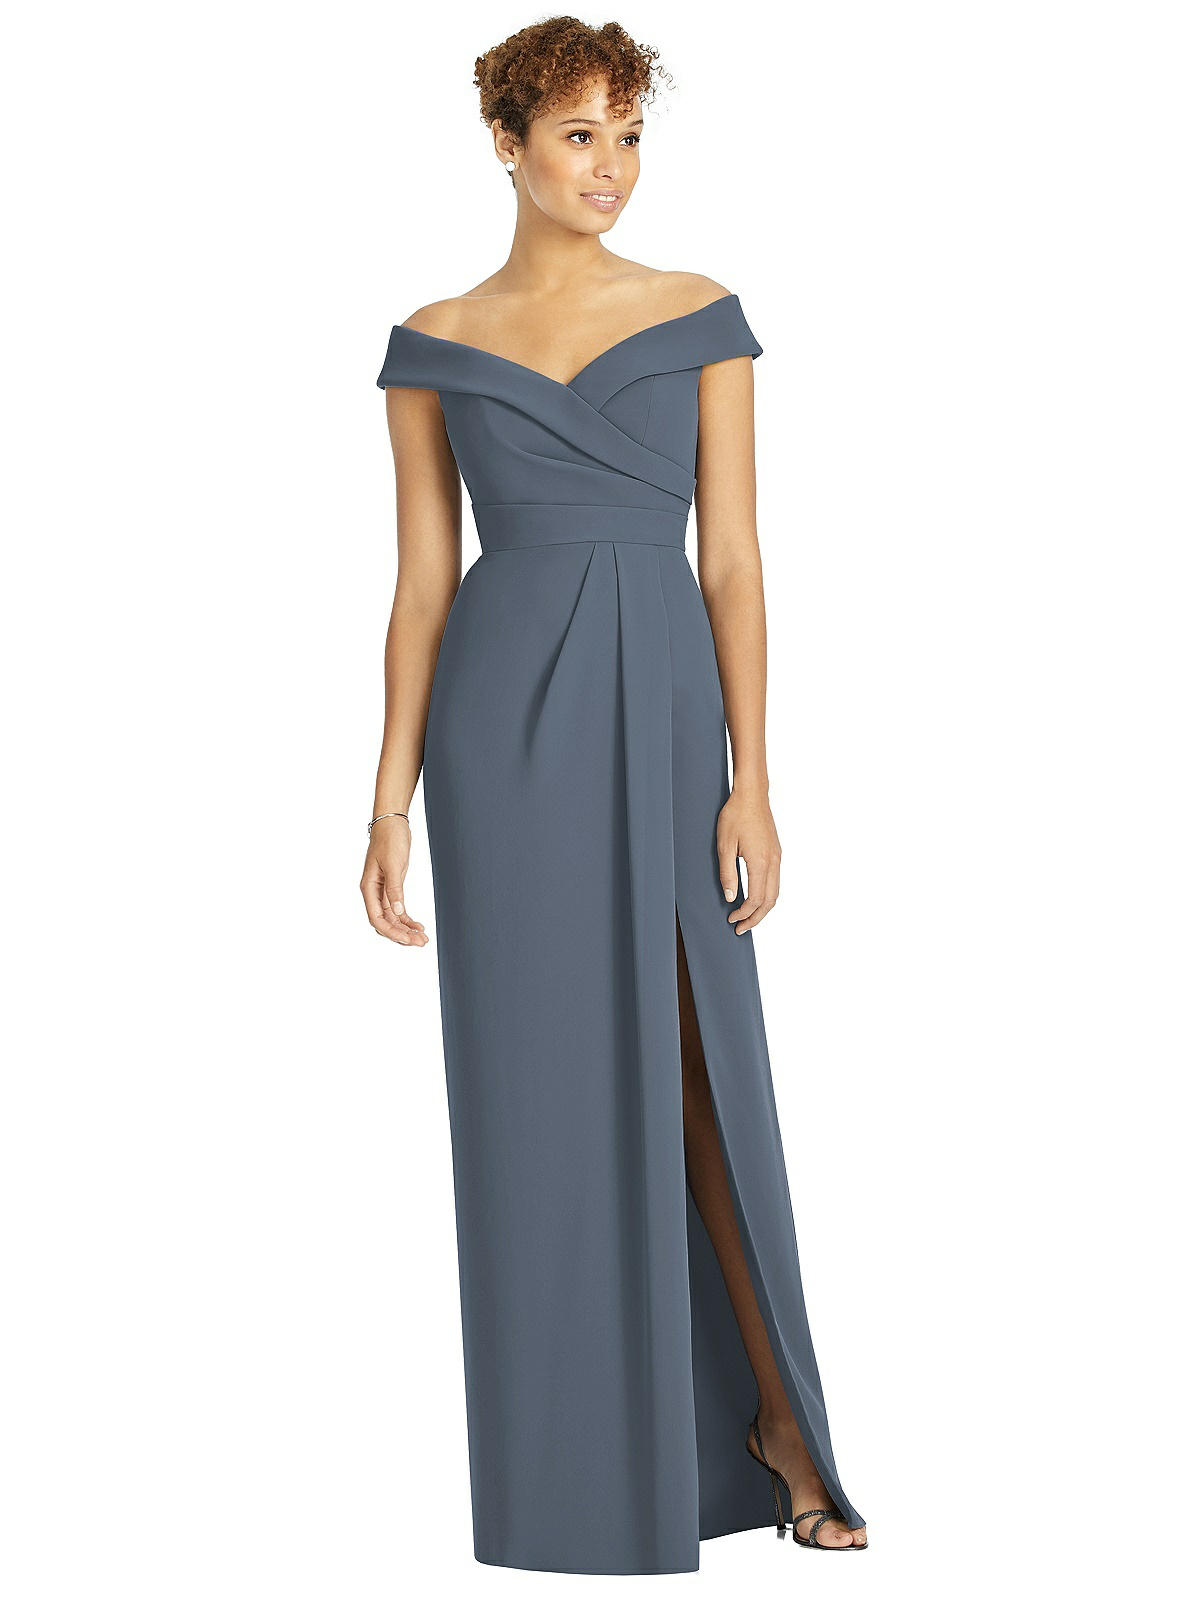 Cuffed Off-the-shoulder Faux Wrap Maxi Bridesmaid Dress With Front Slit In  Silverstone